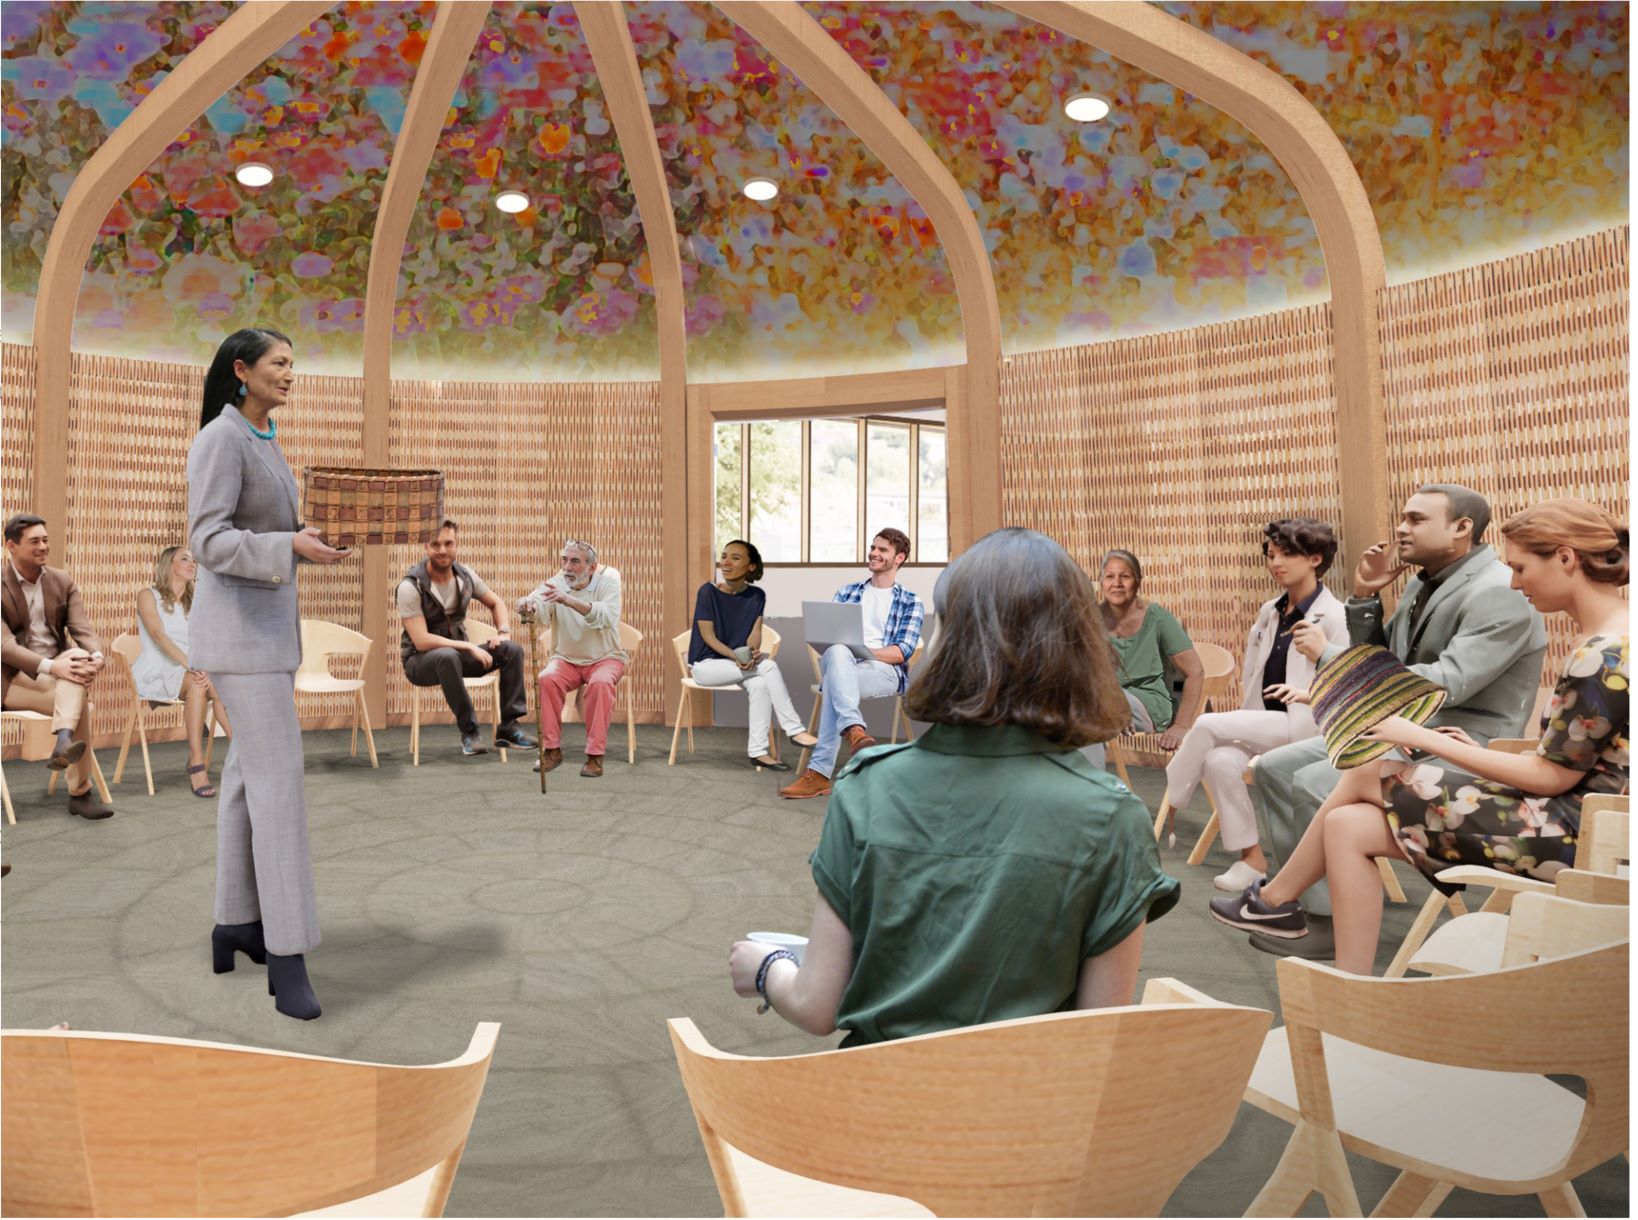 Rendering of the interior view of the Indigenous Multi-Purpose Room